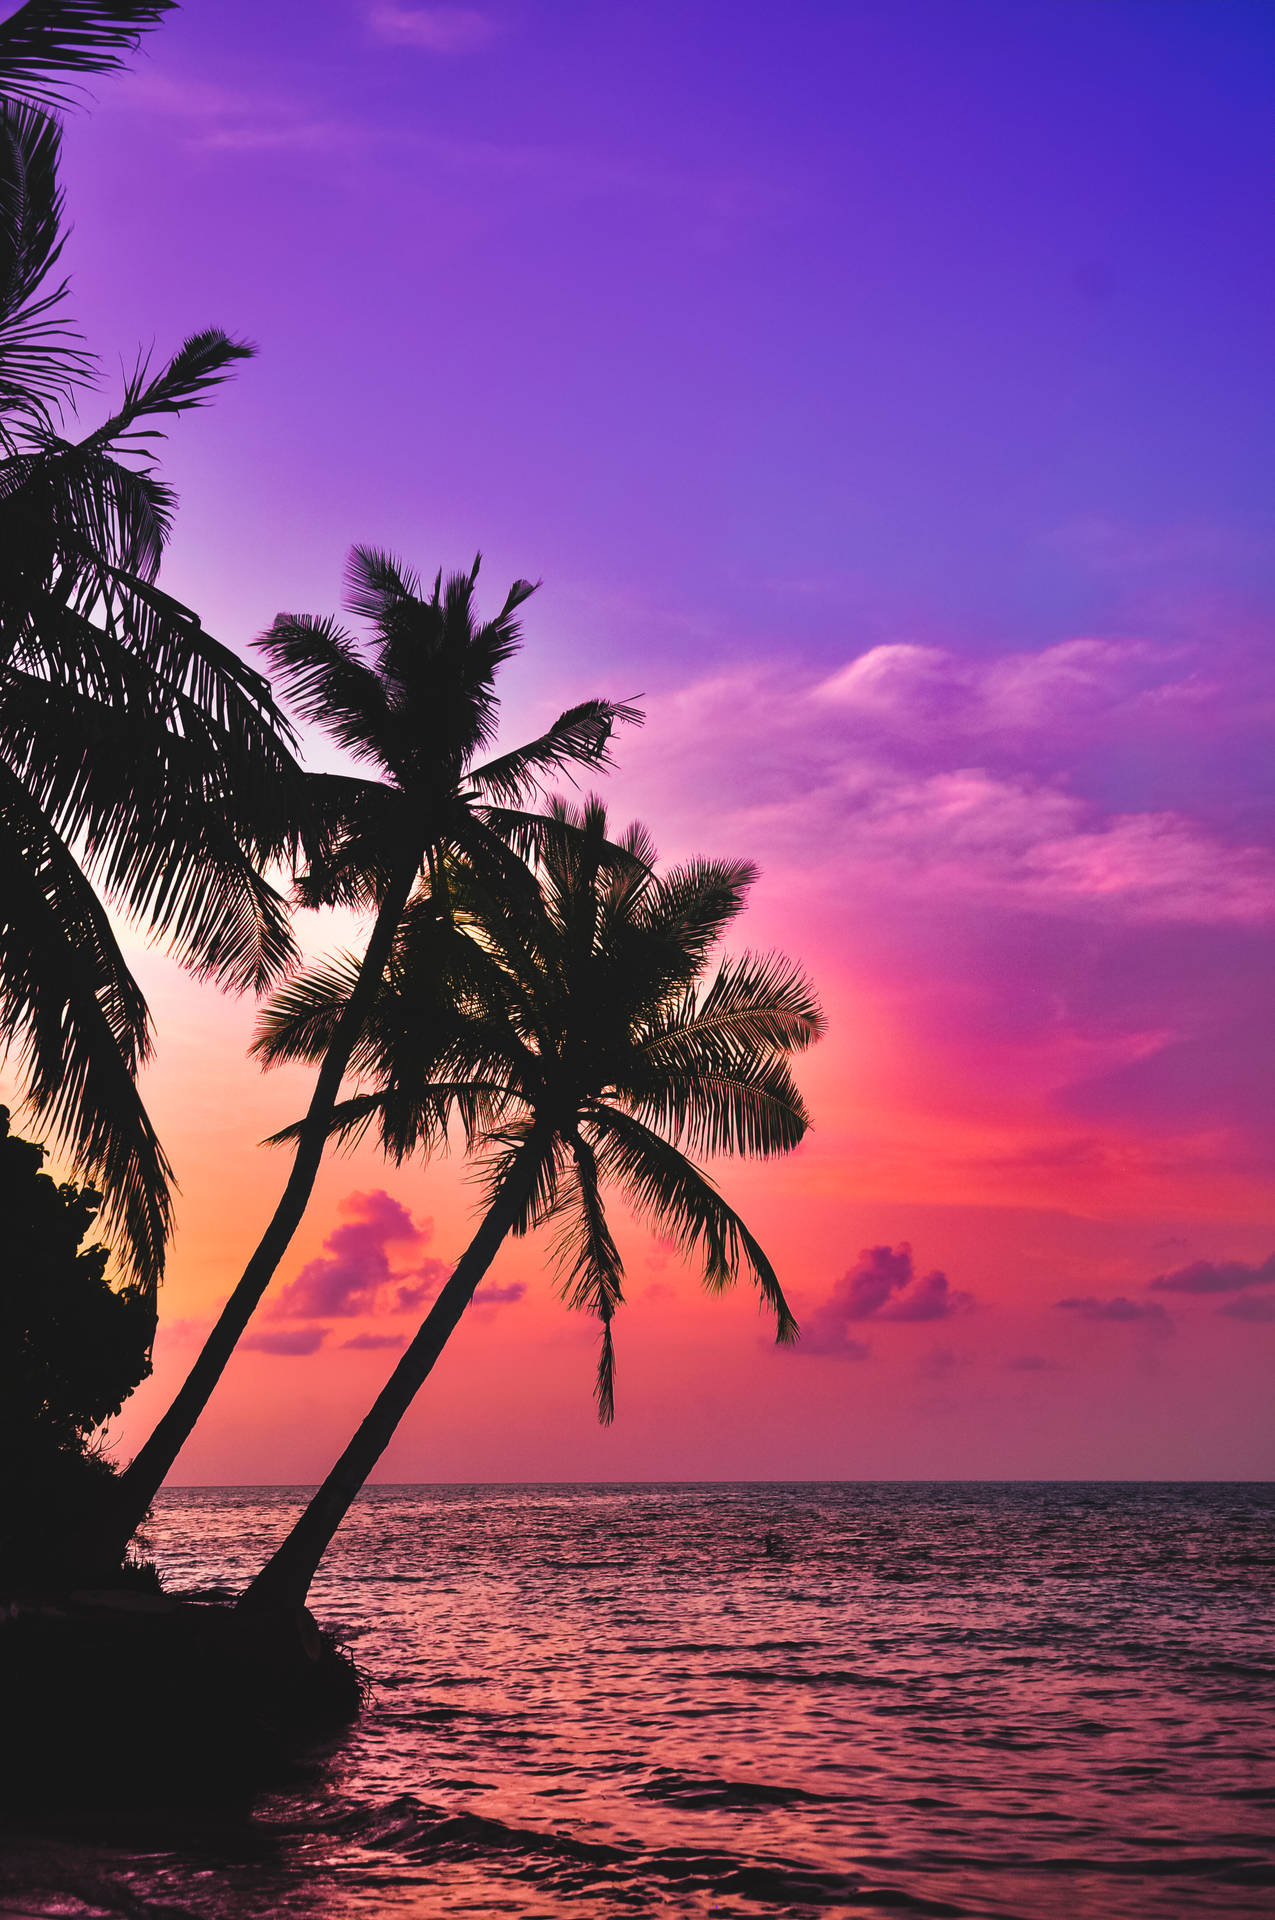 Feel the warmth of summer's sunset Wallpaper